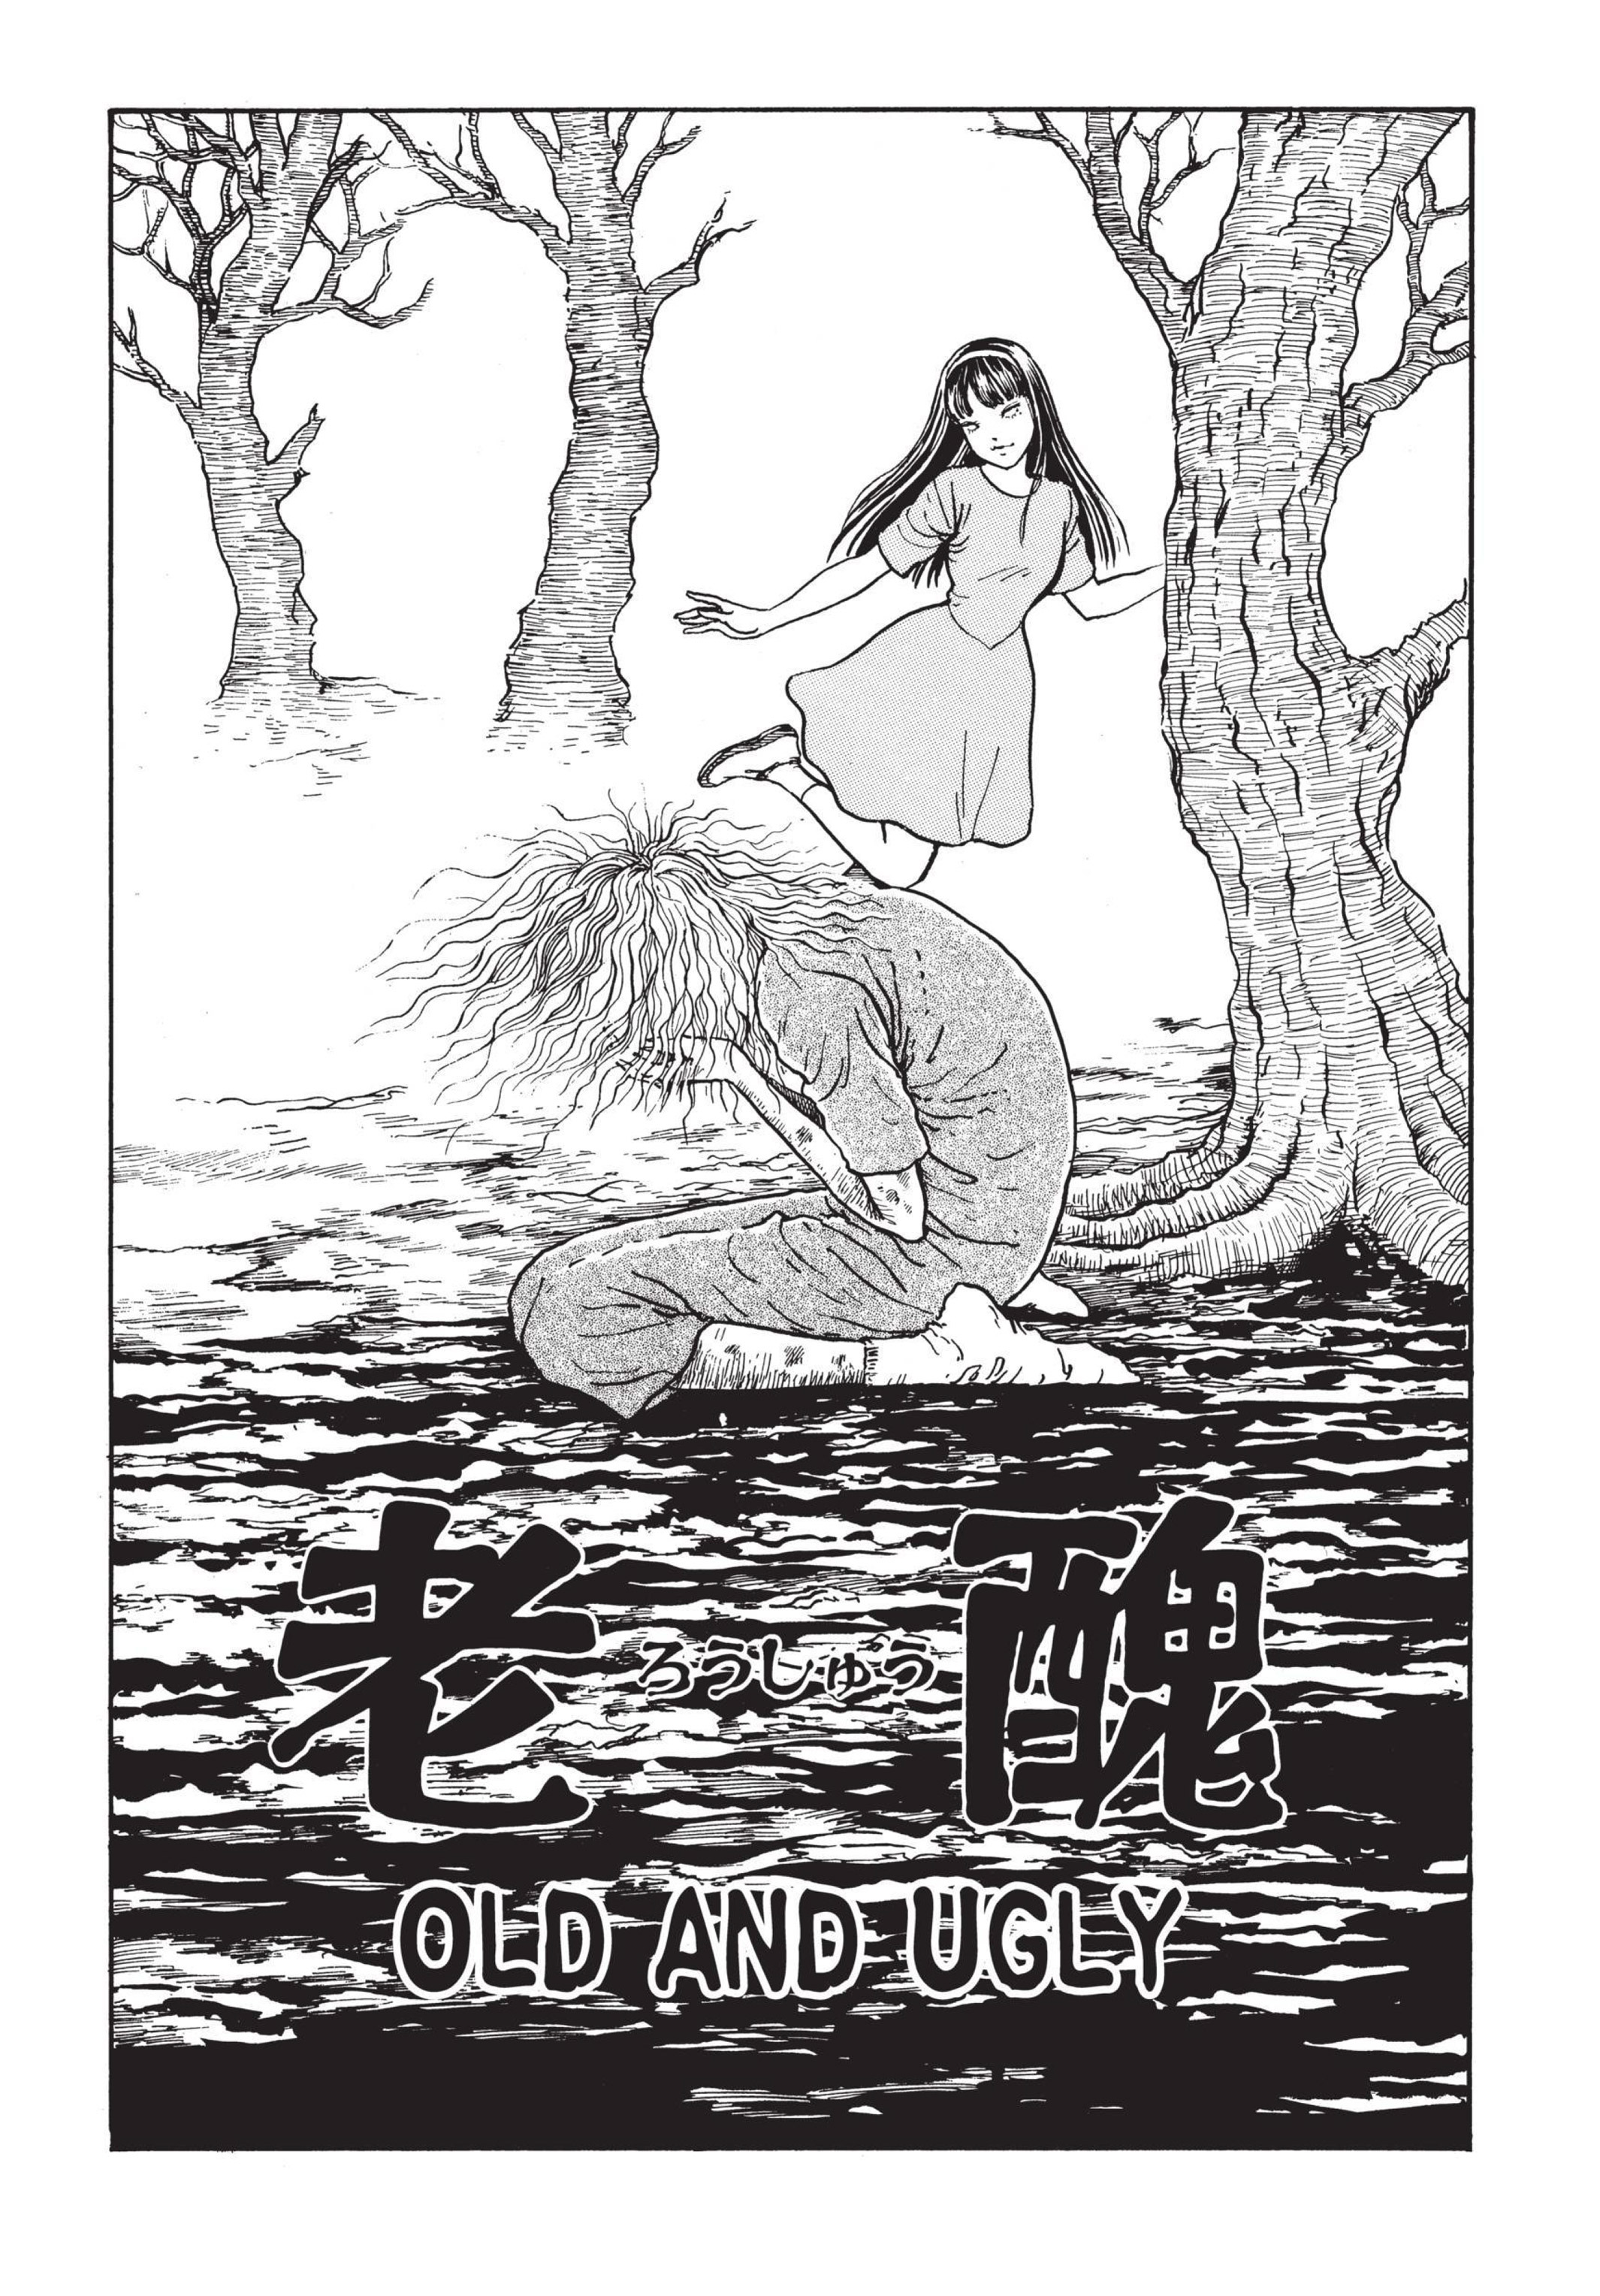 Tomie: Old and Ugly | Junji Ito Wiki | Fandom